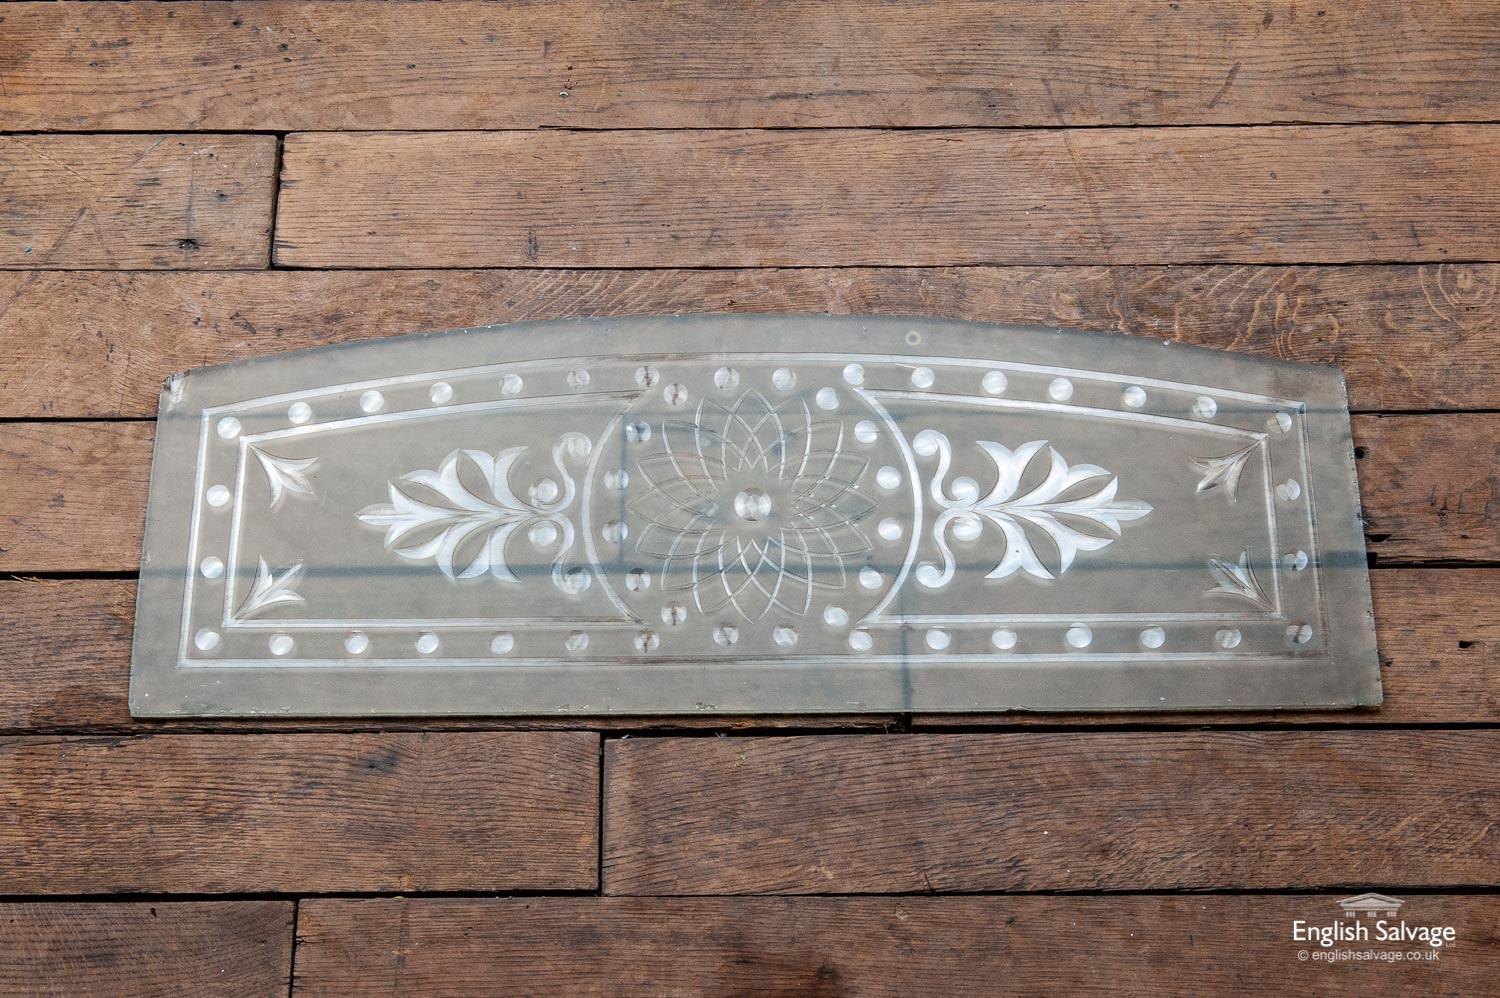 This reclaimed etched glass panel with an arched top has attractive leaf detailing and a circles design border with a geometric curved design at the centre. There are some chips and nibbles to the edges, but overall it appears to be in sound